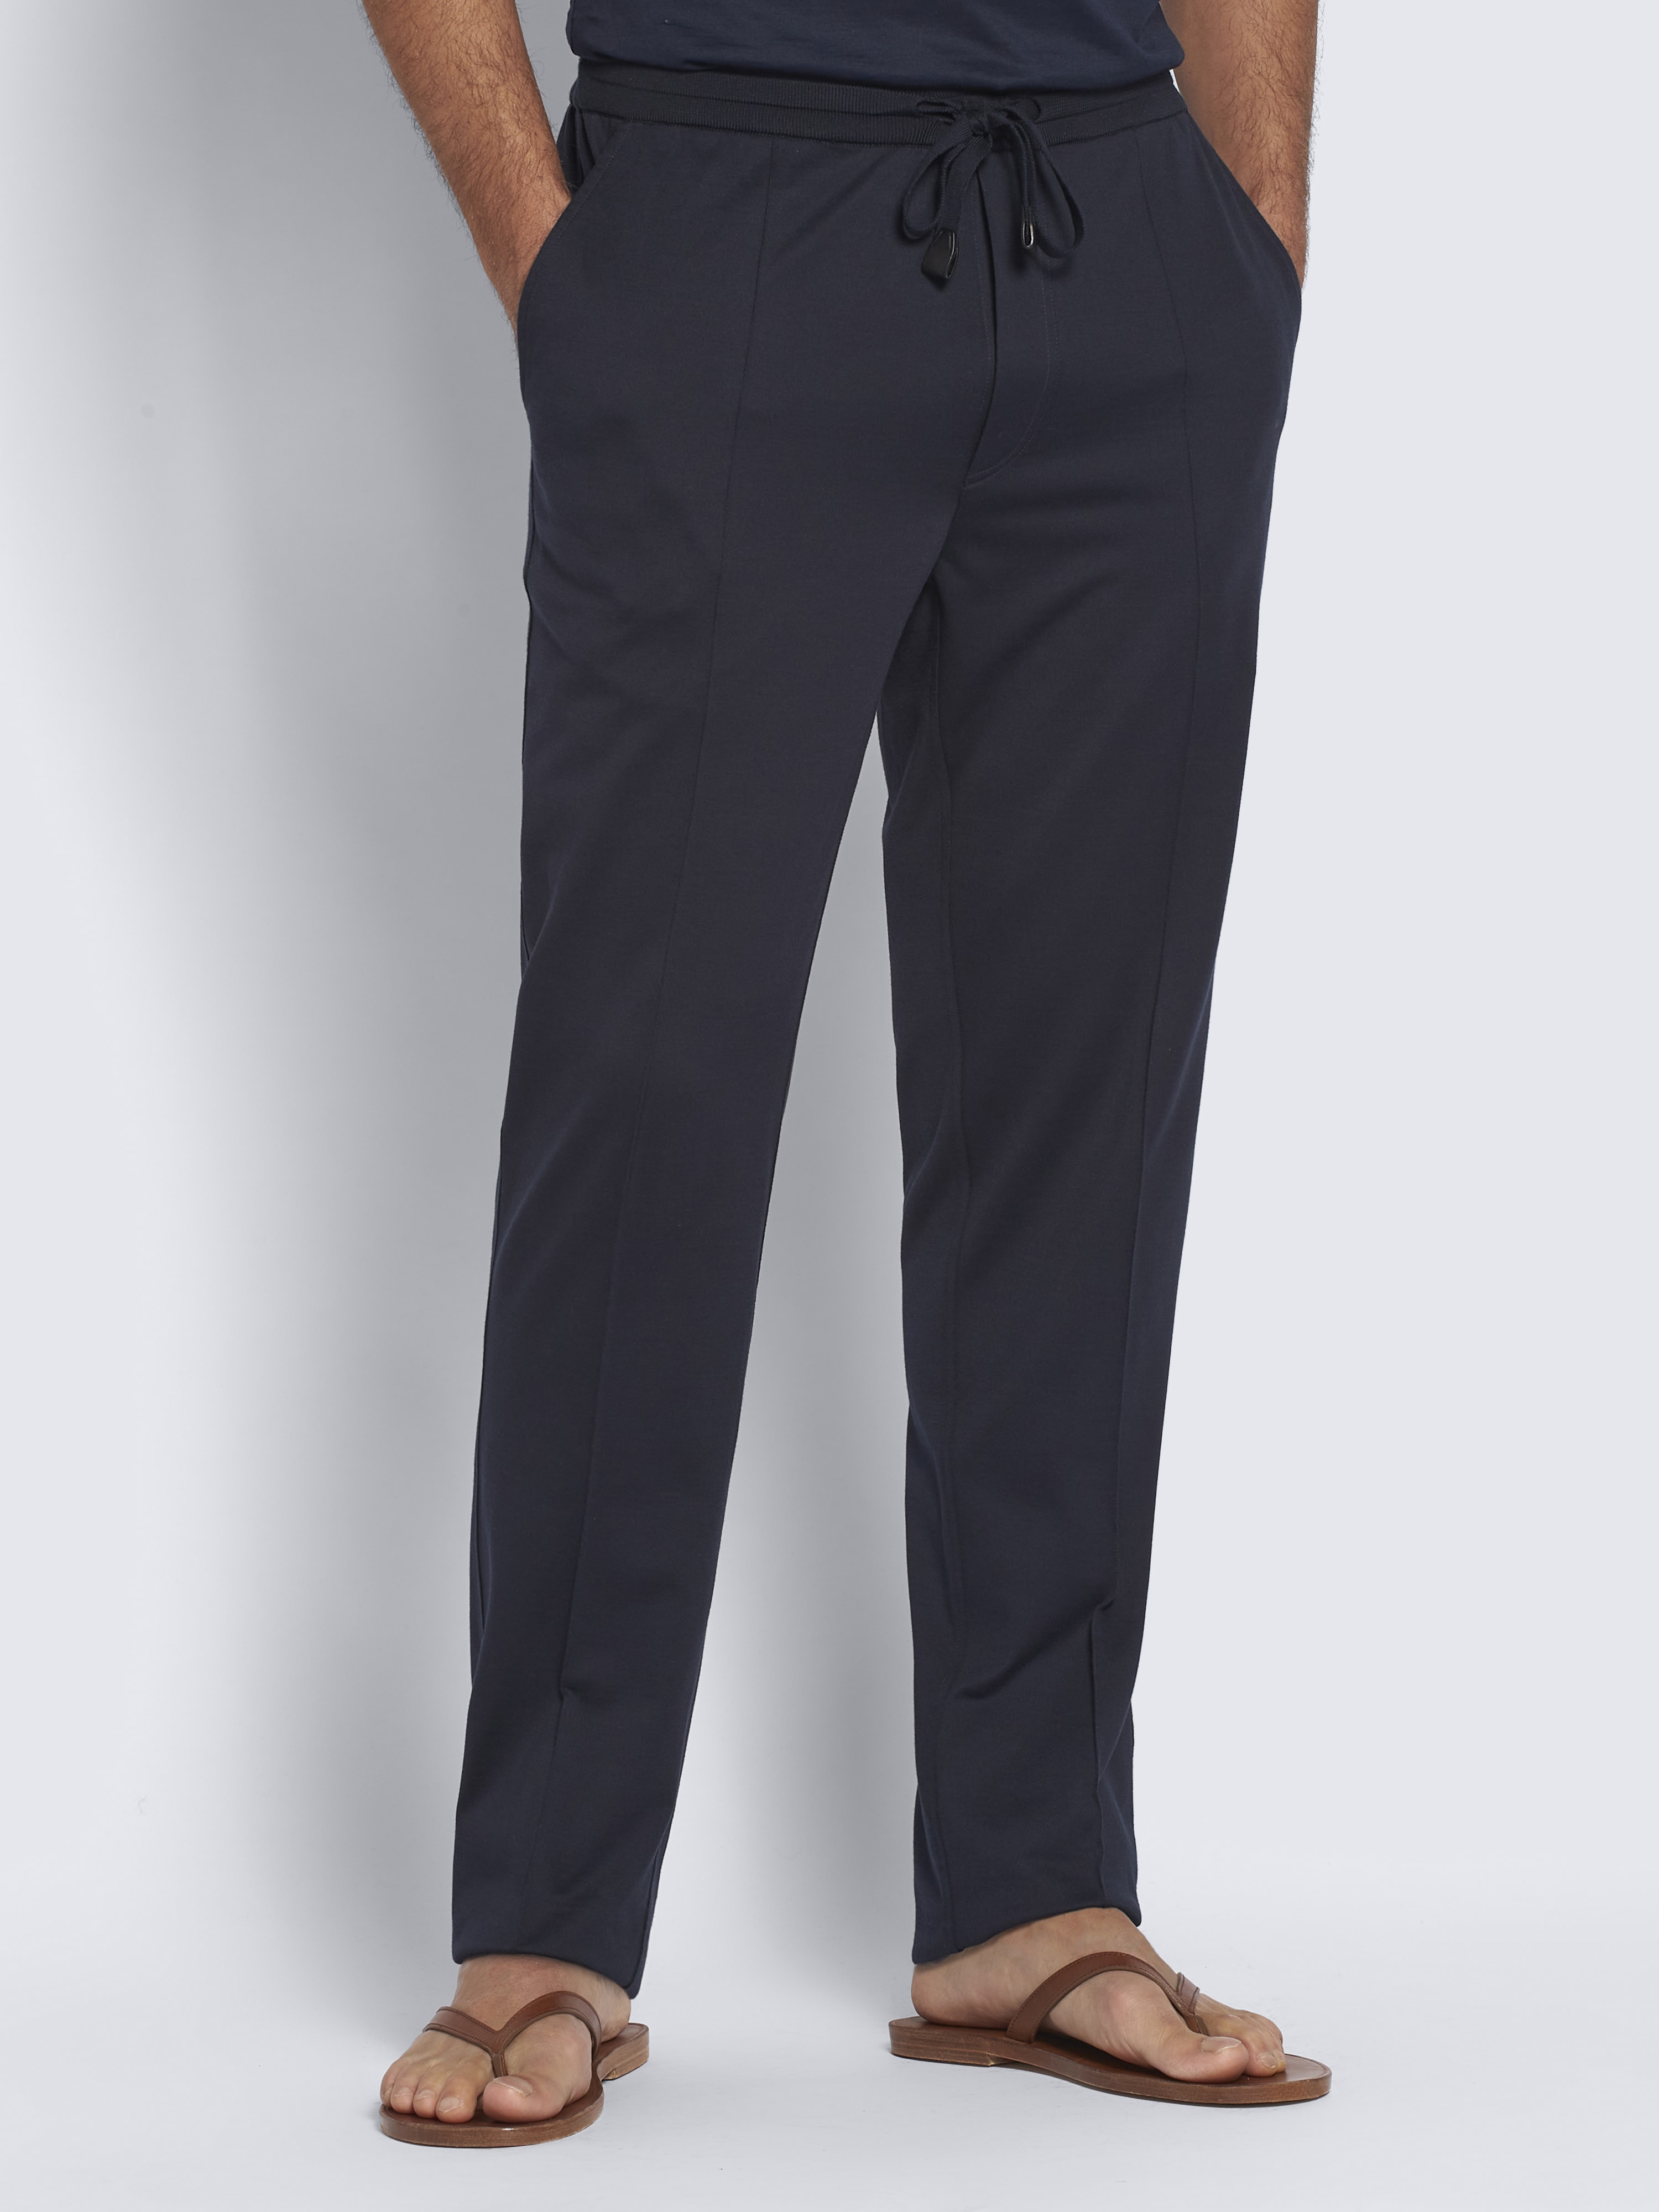 Travel Trousers  Buy Travel Trousers online in India